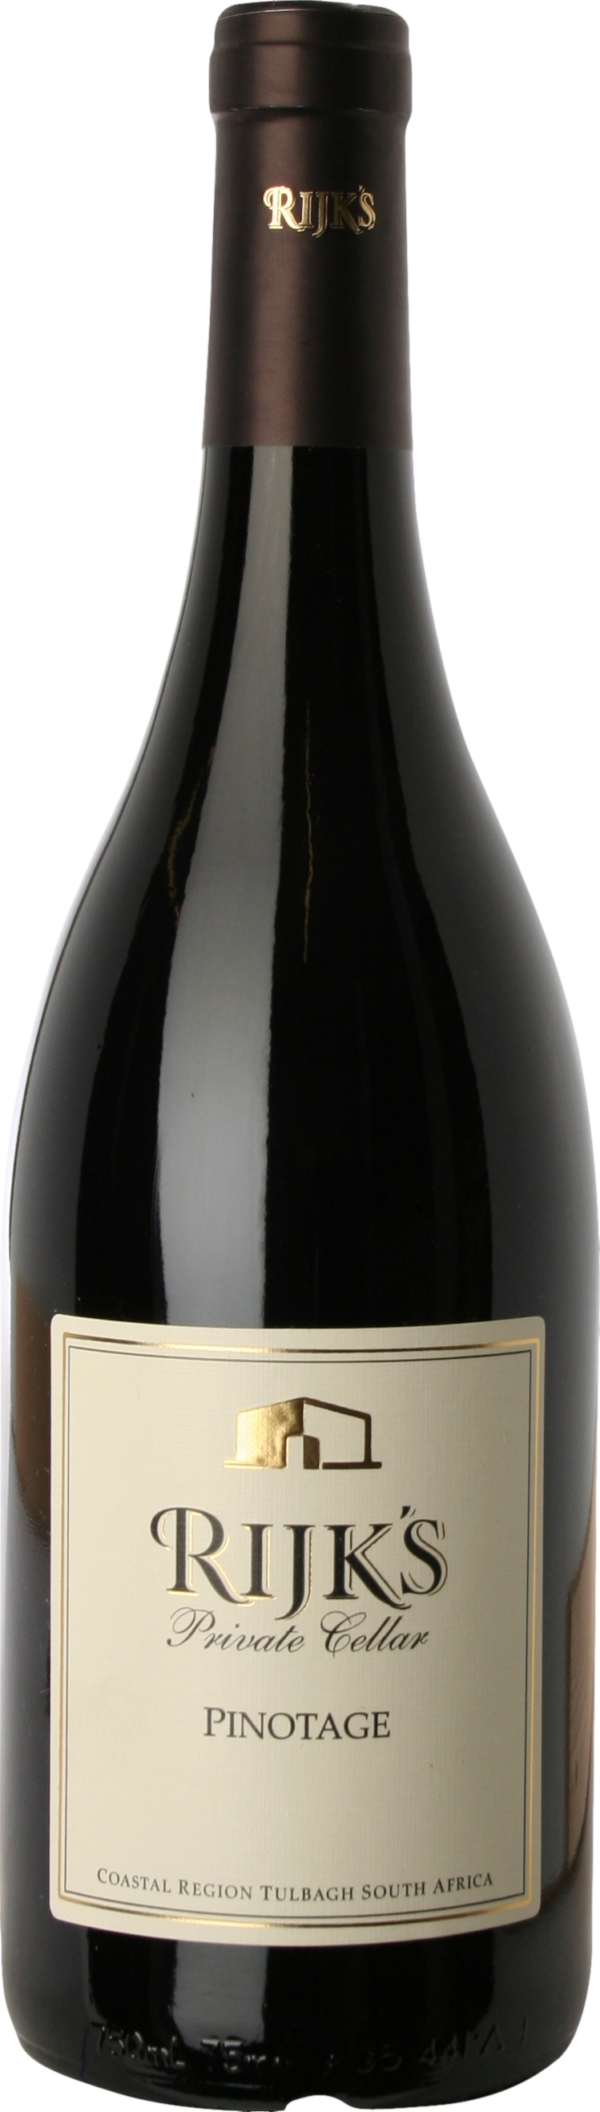 Product image of Rijk's Private Cellar Pinotage 2019 from 8wines